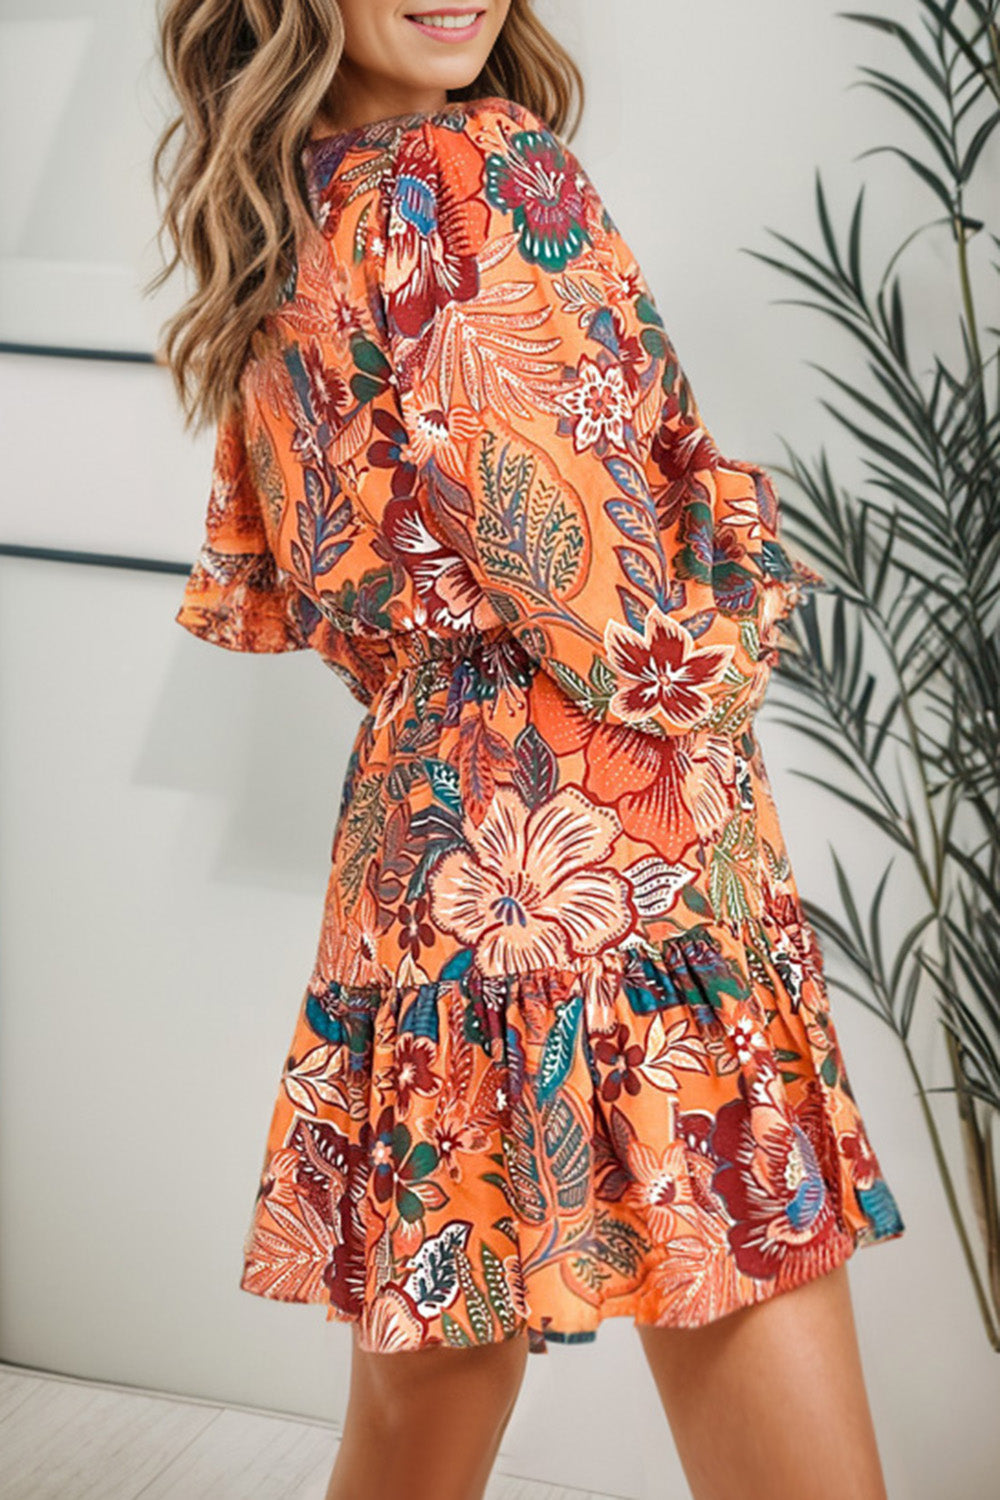 Tropical Print Tie Waist Lantern Sleeve Mini Dress - Tophatter Deals and Online Shopping - Electronics, Jewelry, Beauty, Health, Gadgets, Fashion - Tophatter's Discounts & Offers - tophatters - tophatters.co